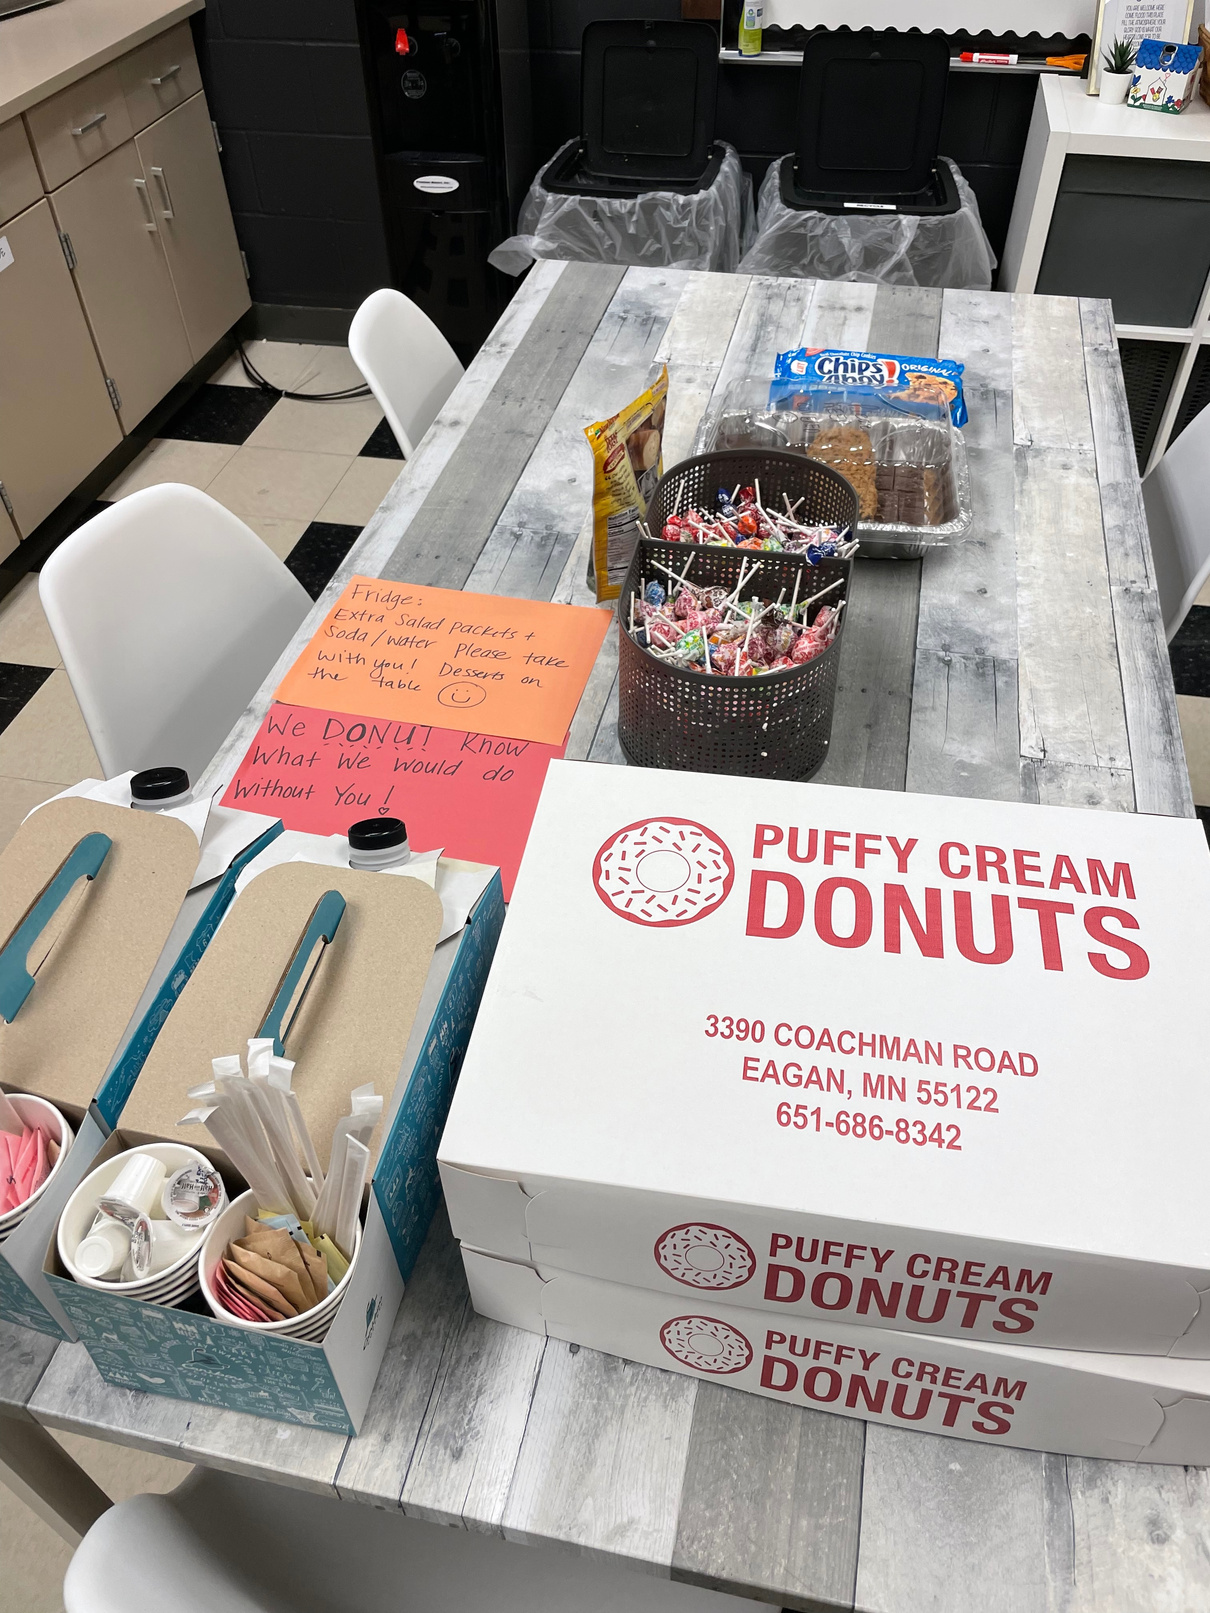 Donuts and coffee during conferences